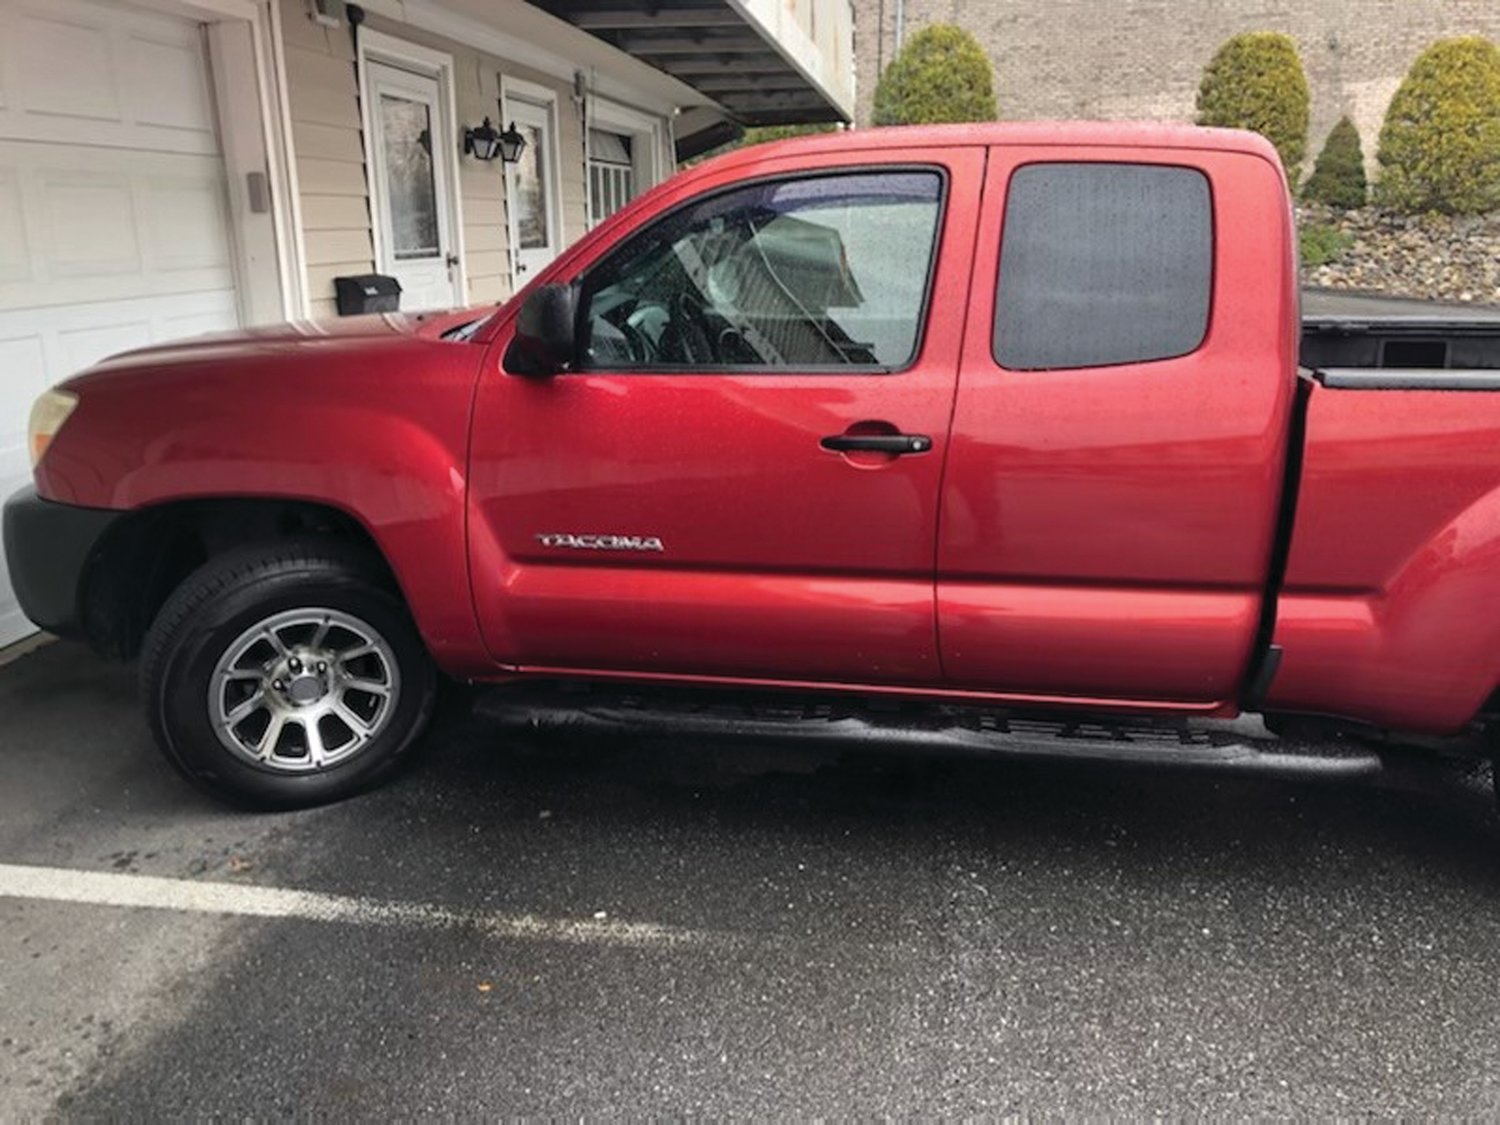 HAVE YOU SEEN THIS TRUCK? Police are also looking for Lester’s vehicle, a 2006 Red Toyota Tacoma pickup truck, with a black front bumper and aftermarket rims, possibly bearing RI registration 1IL194.